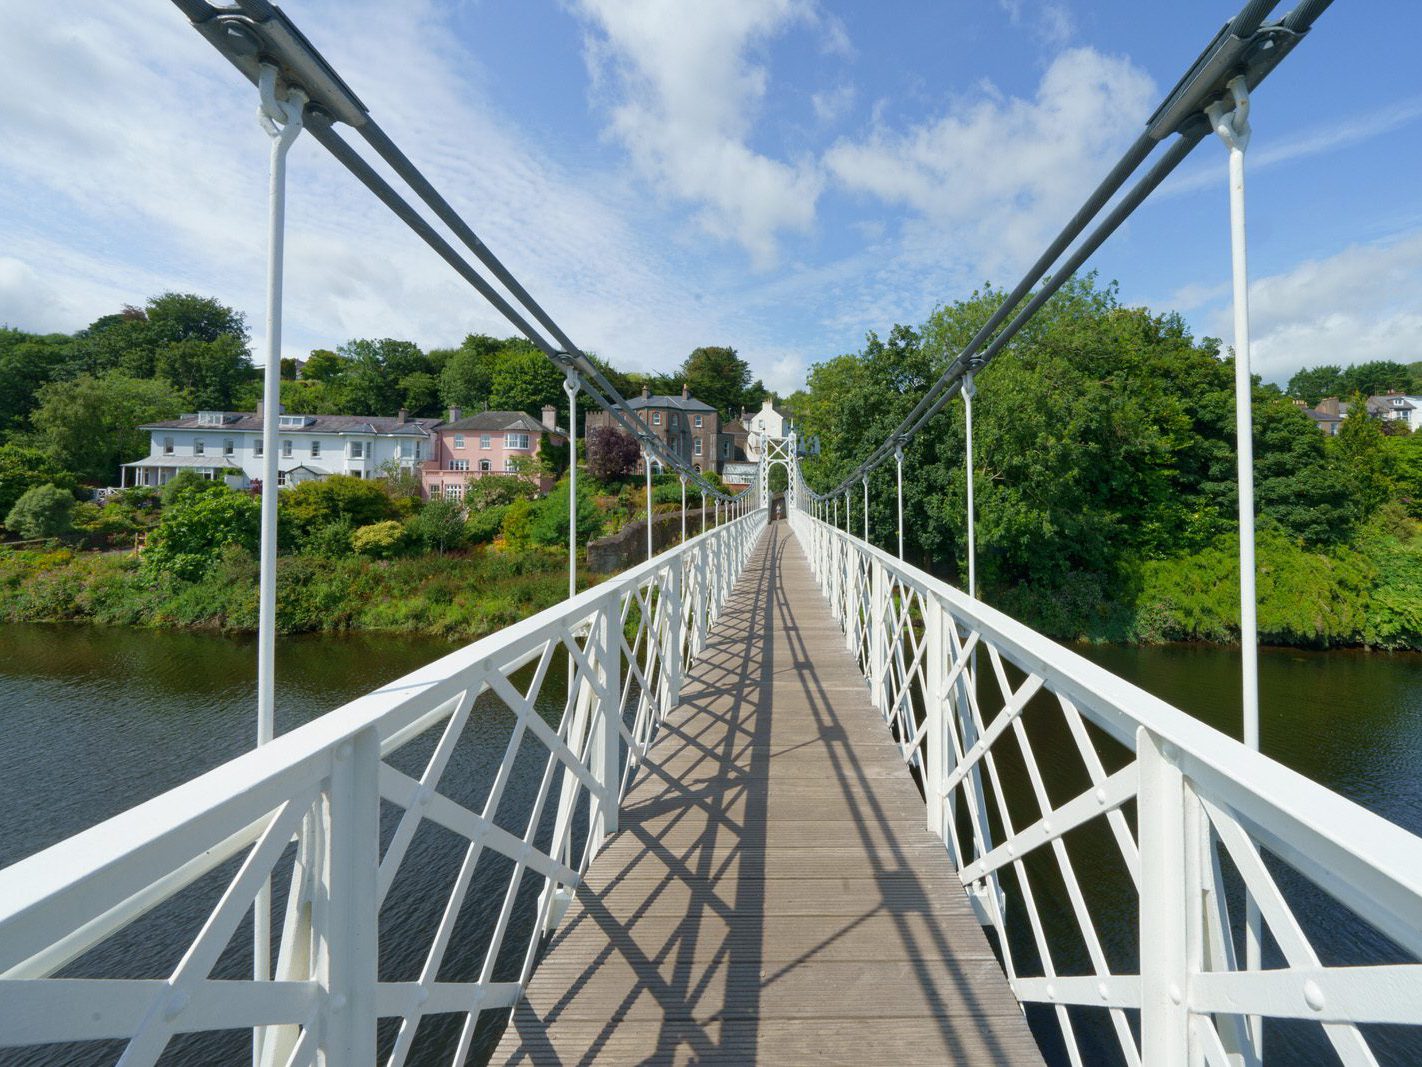 THE REPAIRED AND RESTORED SHAKEY BRIDGE ACROSS THE RIVER LEE [THERE IS A LITTLE TEDDY BEAR IN SOME OF THE IMAGES]-224549-1